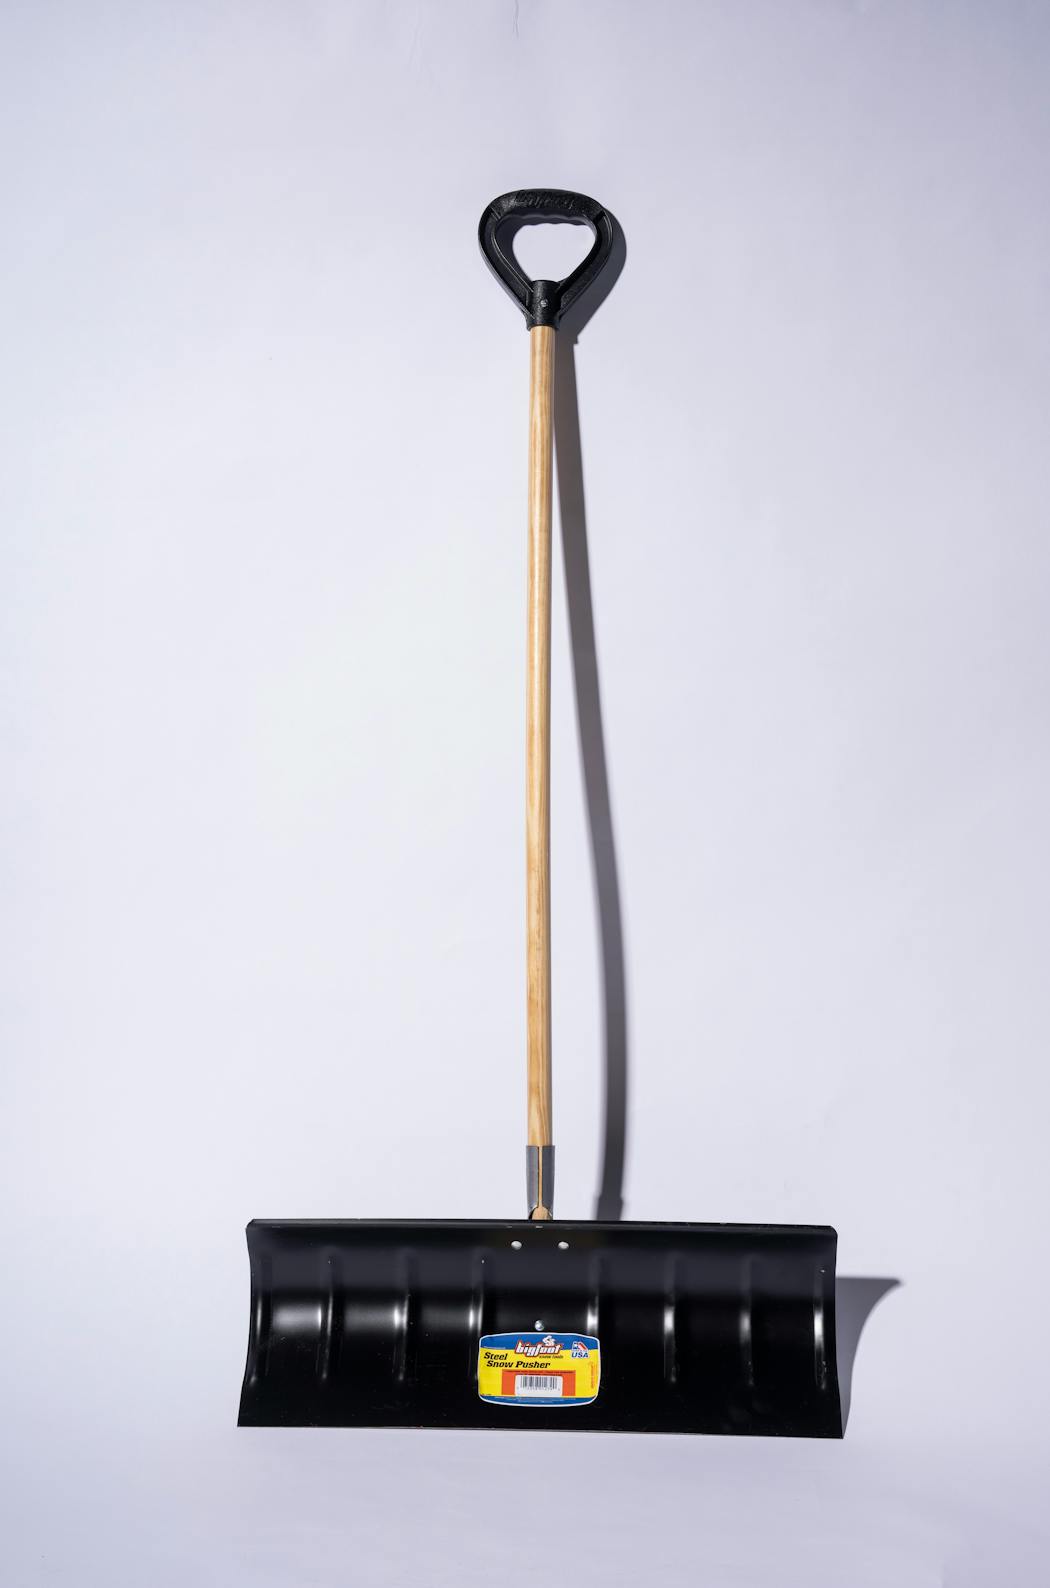 The plow-style shovel, a Bigfoot Steel Snow Pusher.